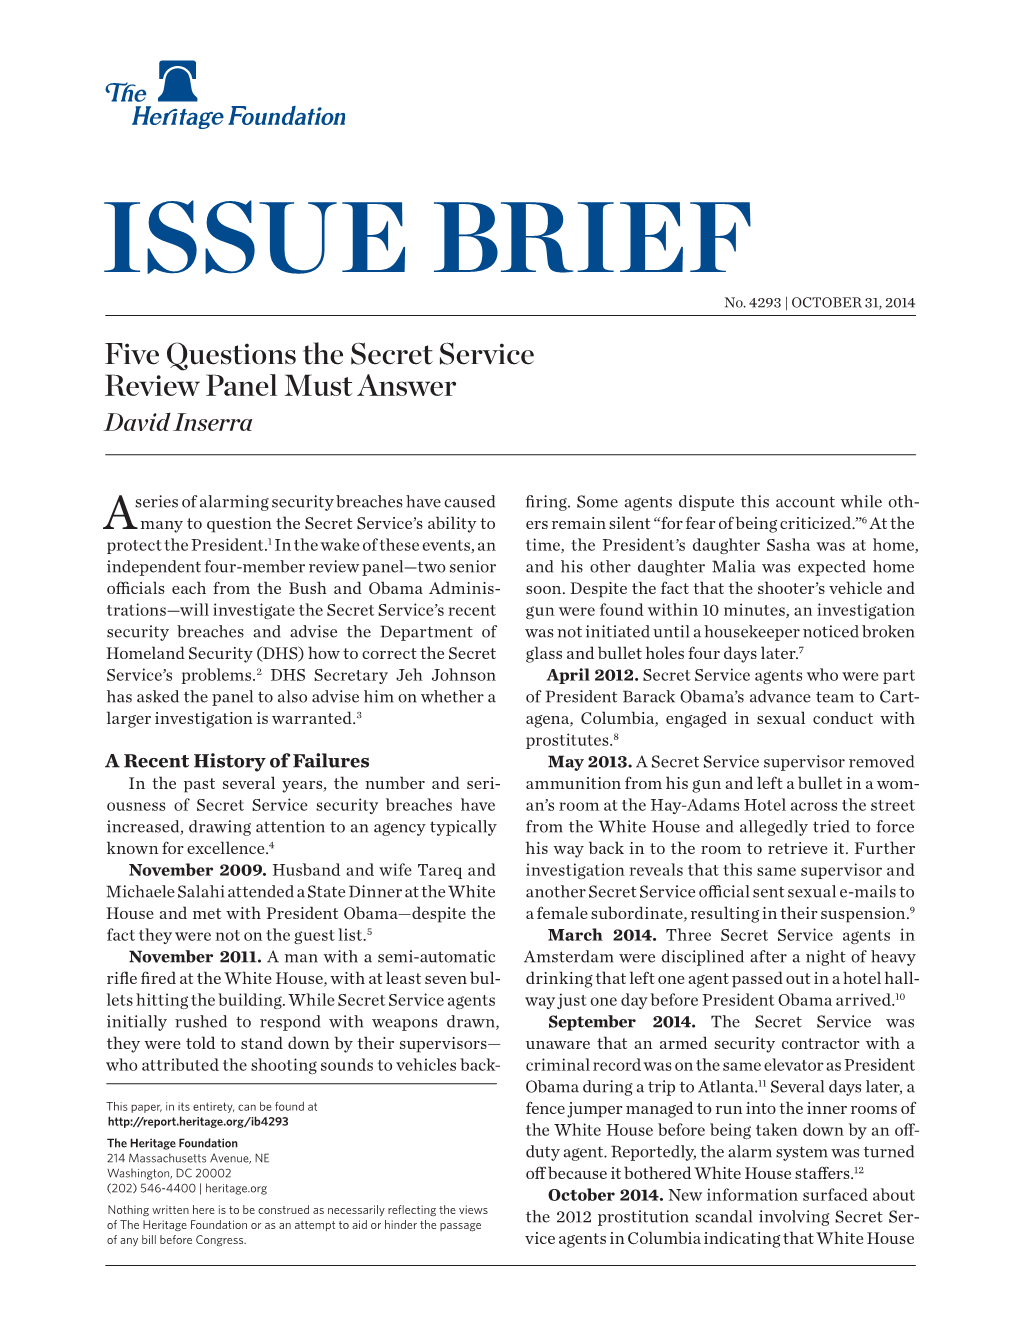 5 Questions the Secret Service Review Panel Must Answer